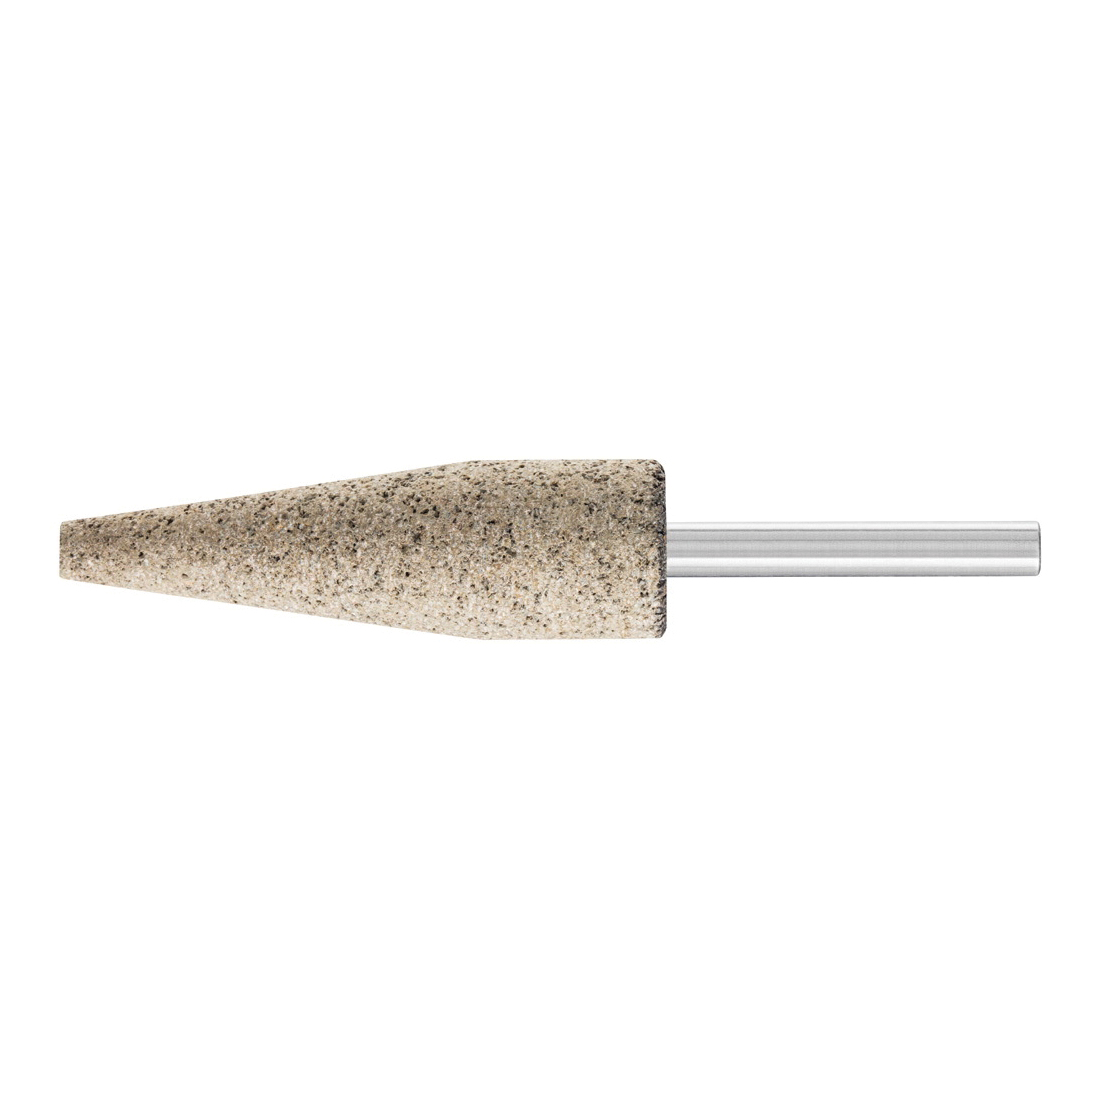 PFERD 35101 A Series Mounted Point, A1 Point, 3/4 in Dia x 2-1/2 in L Head, 1/4 in Dia Shank